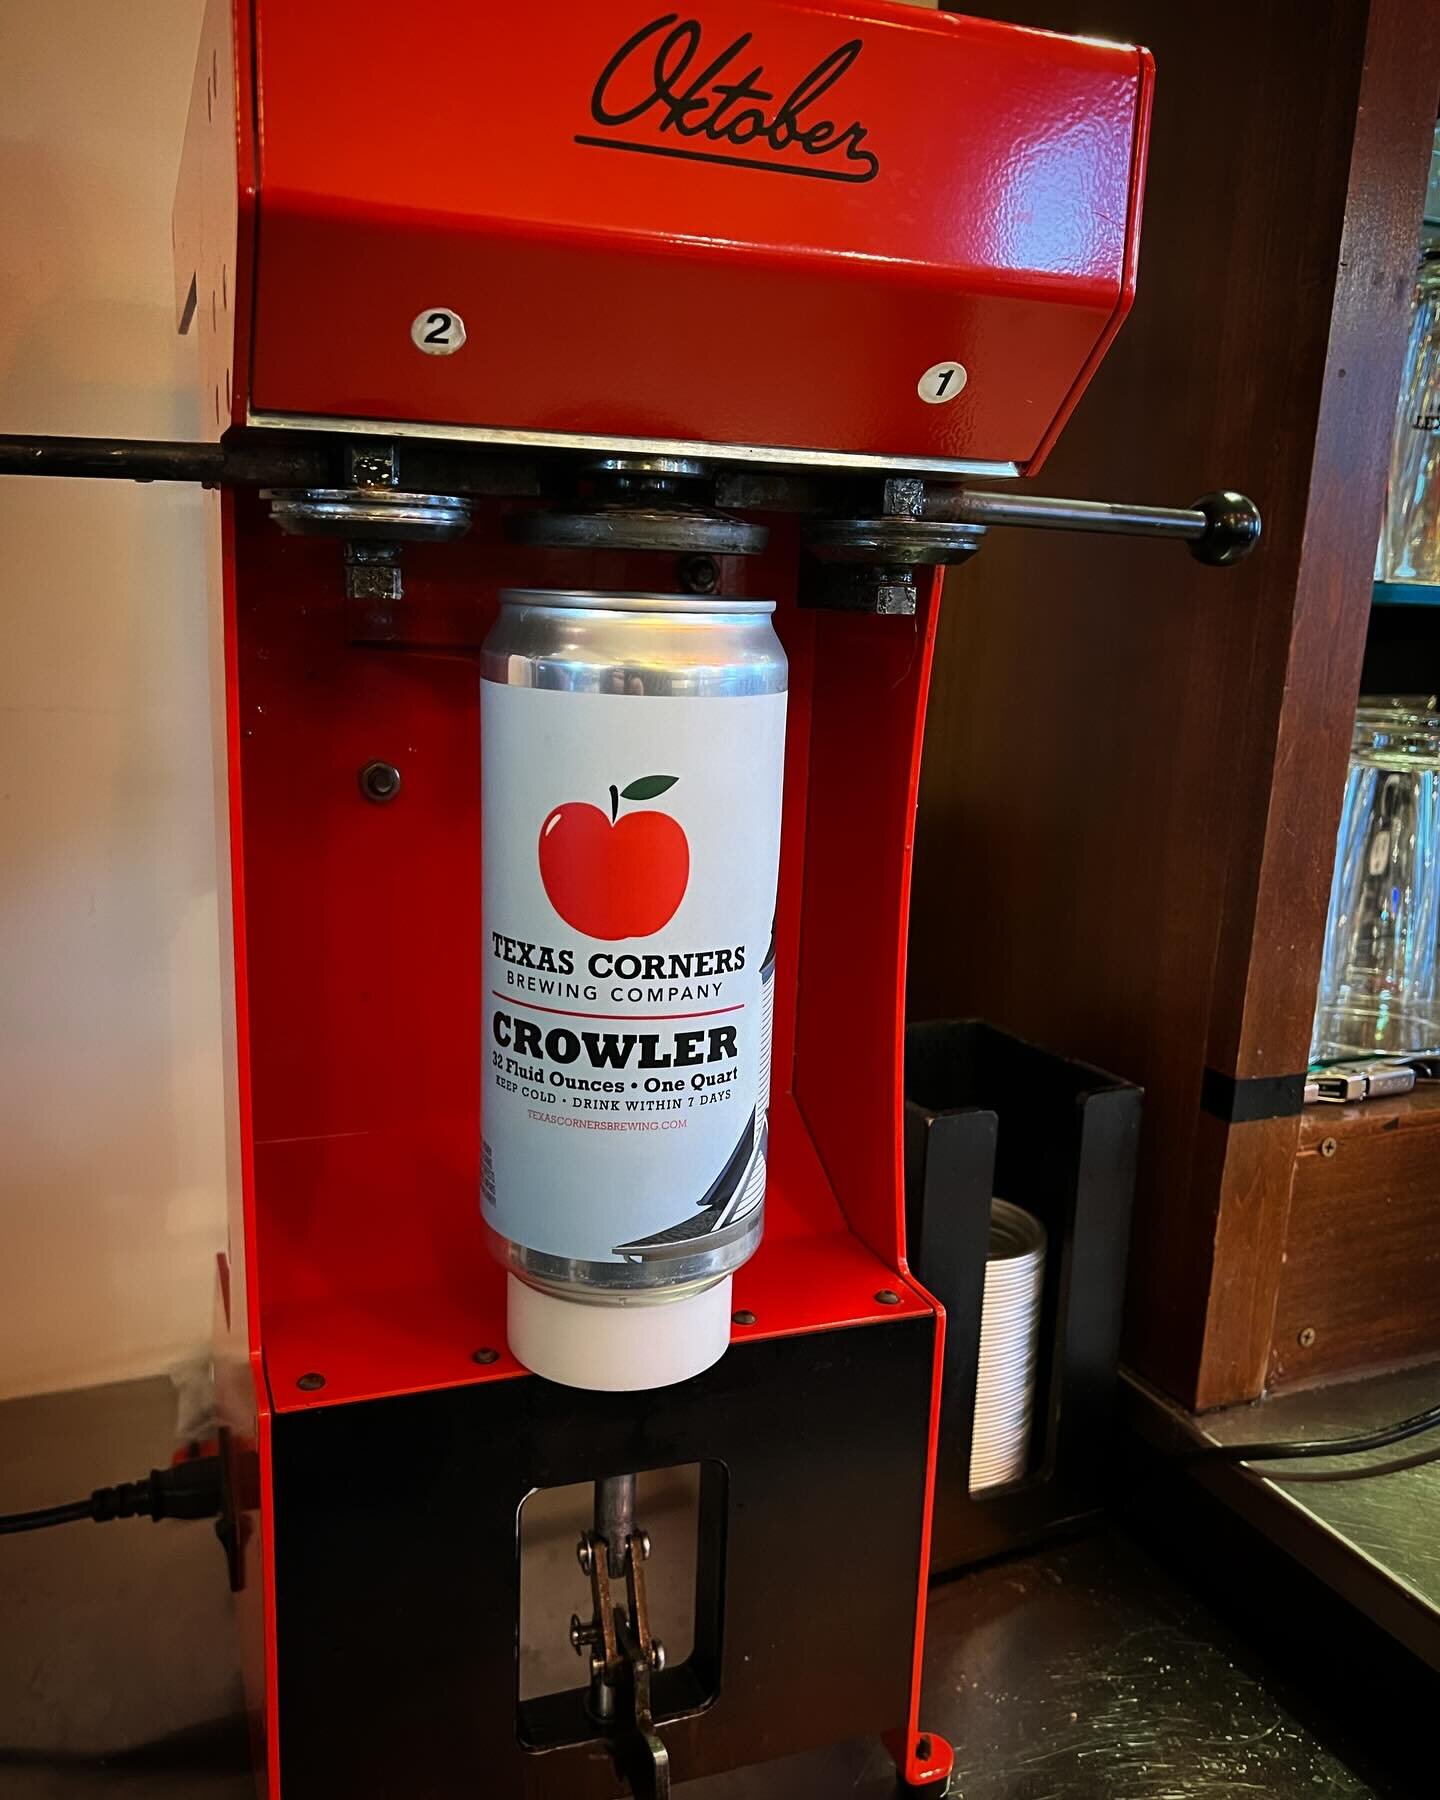 Our @oktoberdesign crowler machine appears to be back up and running! Just in time for the Thanksgiving and Black Friday holidays, be sure to grab your favorite local brew to share with your friends and family!